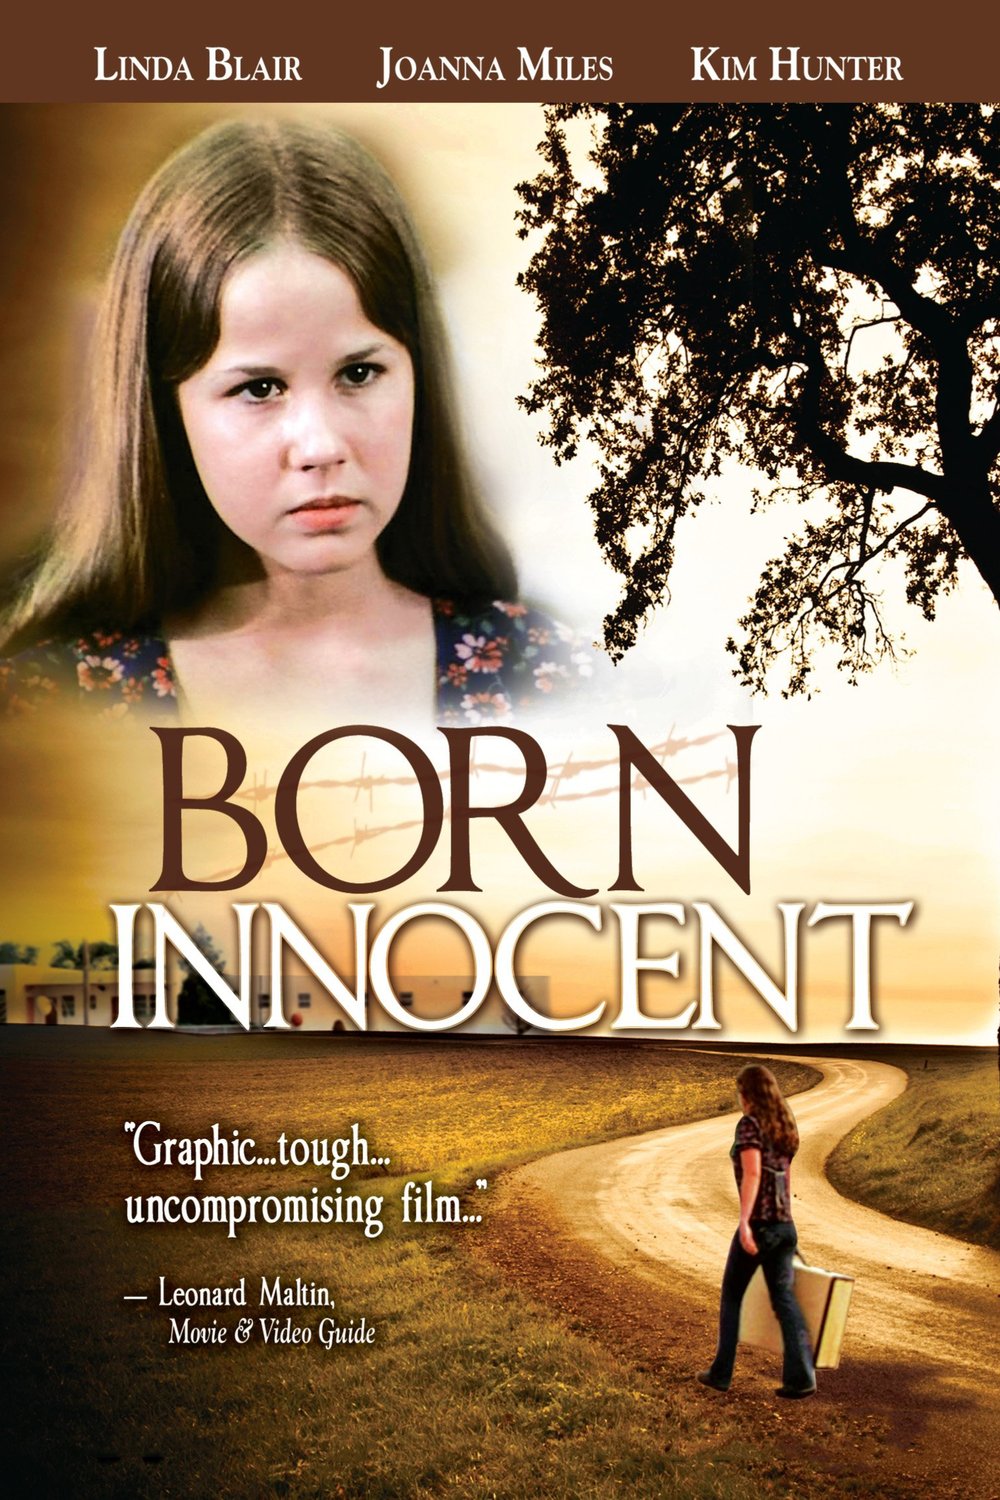 Poster of the movie Born Innocent